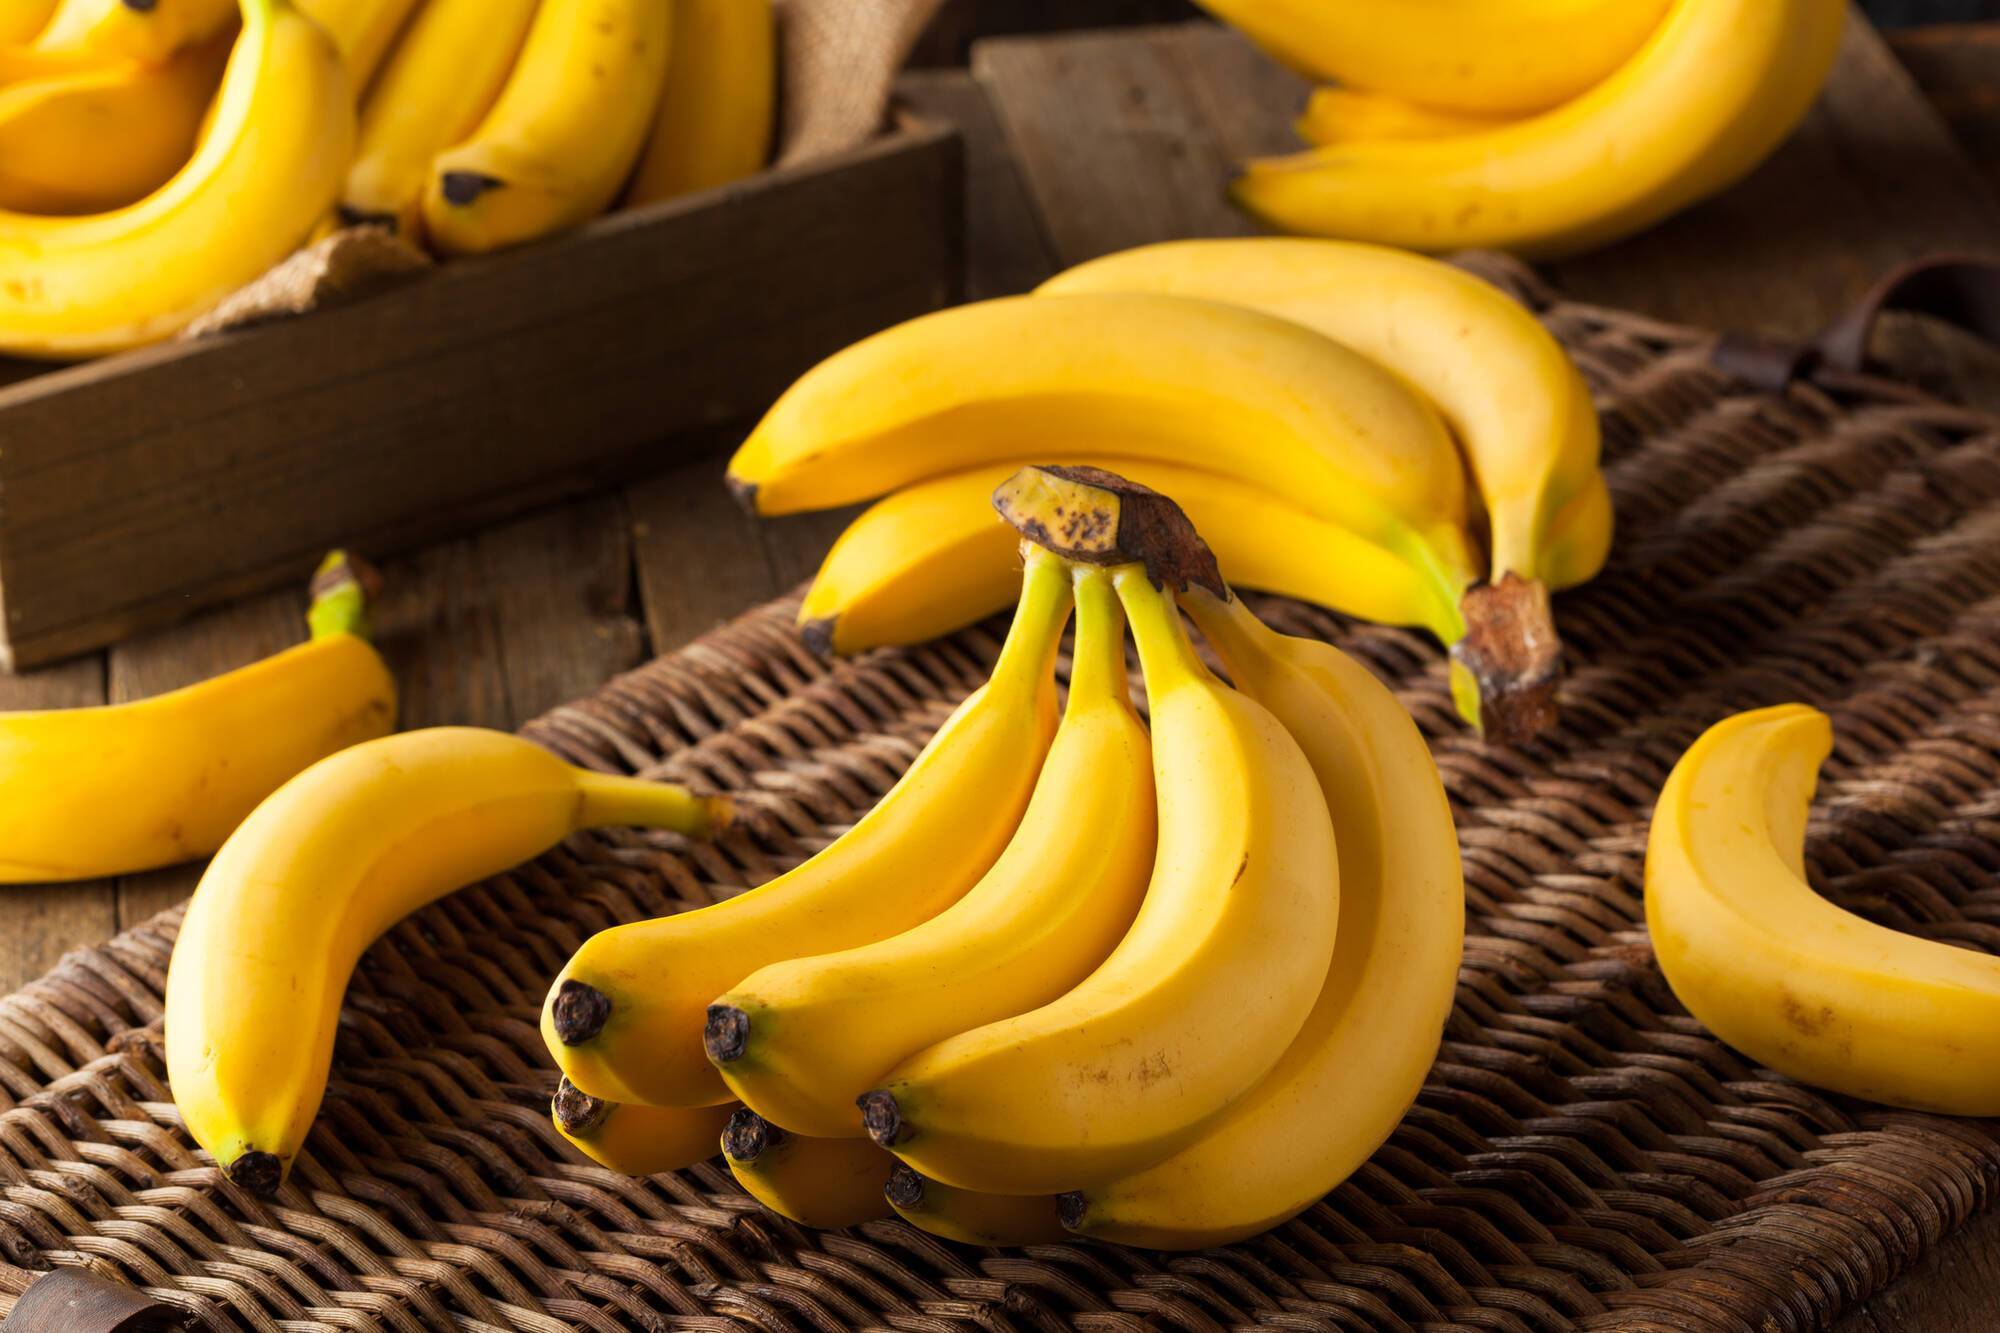 Nutritionists have named 15 reasons why you should eat bananas